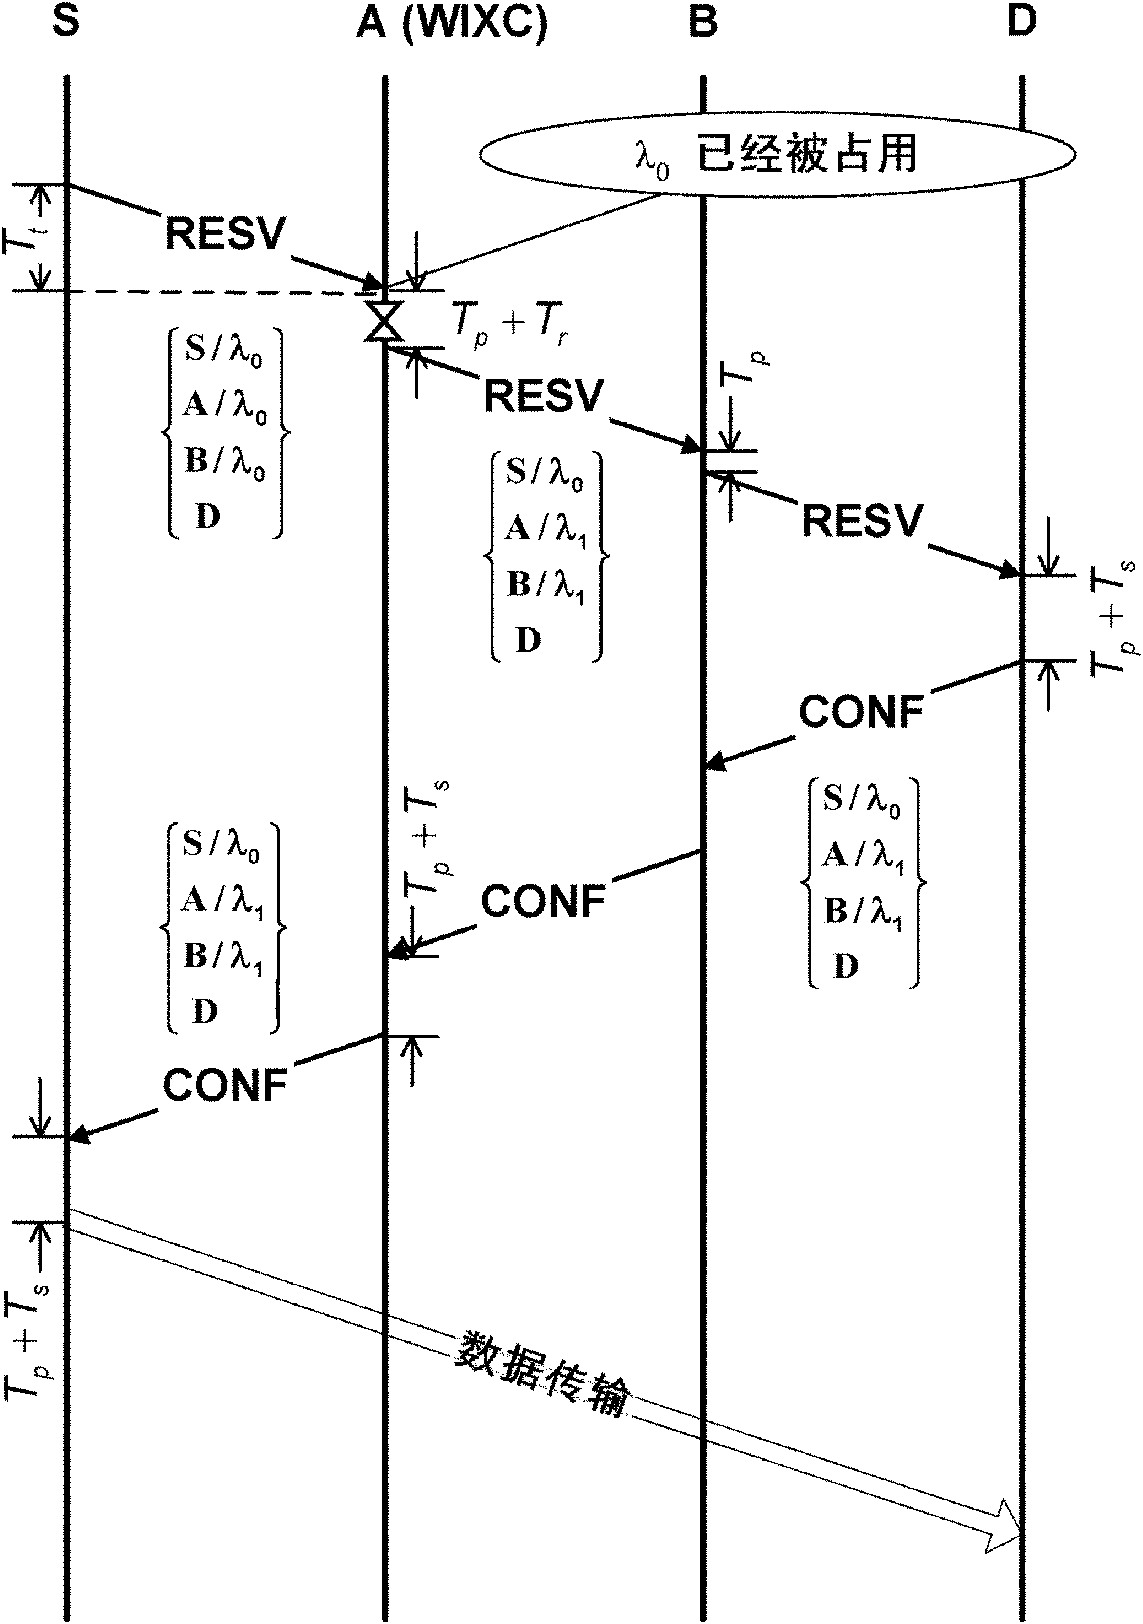 Signaling conflict avoiding method based on connecting establishment of information diffusion optical-fiber network